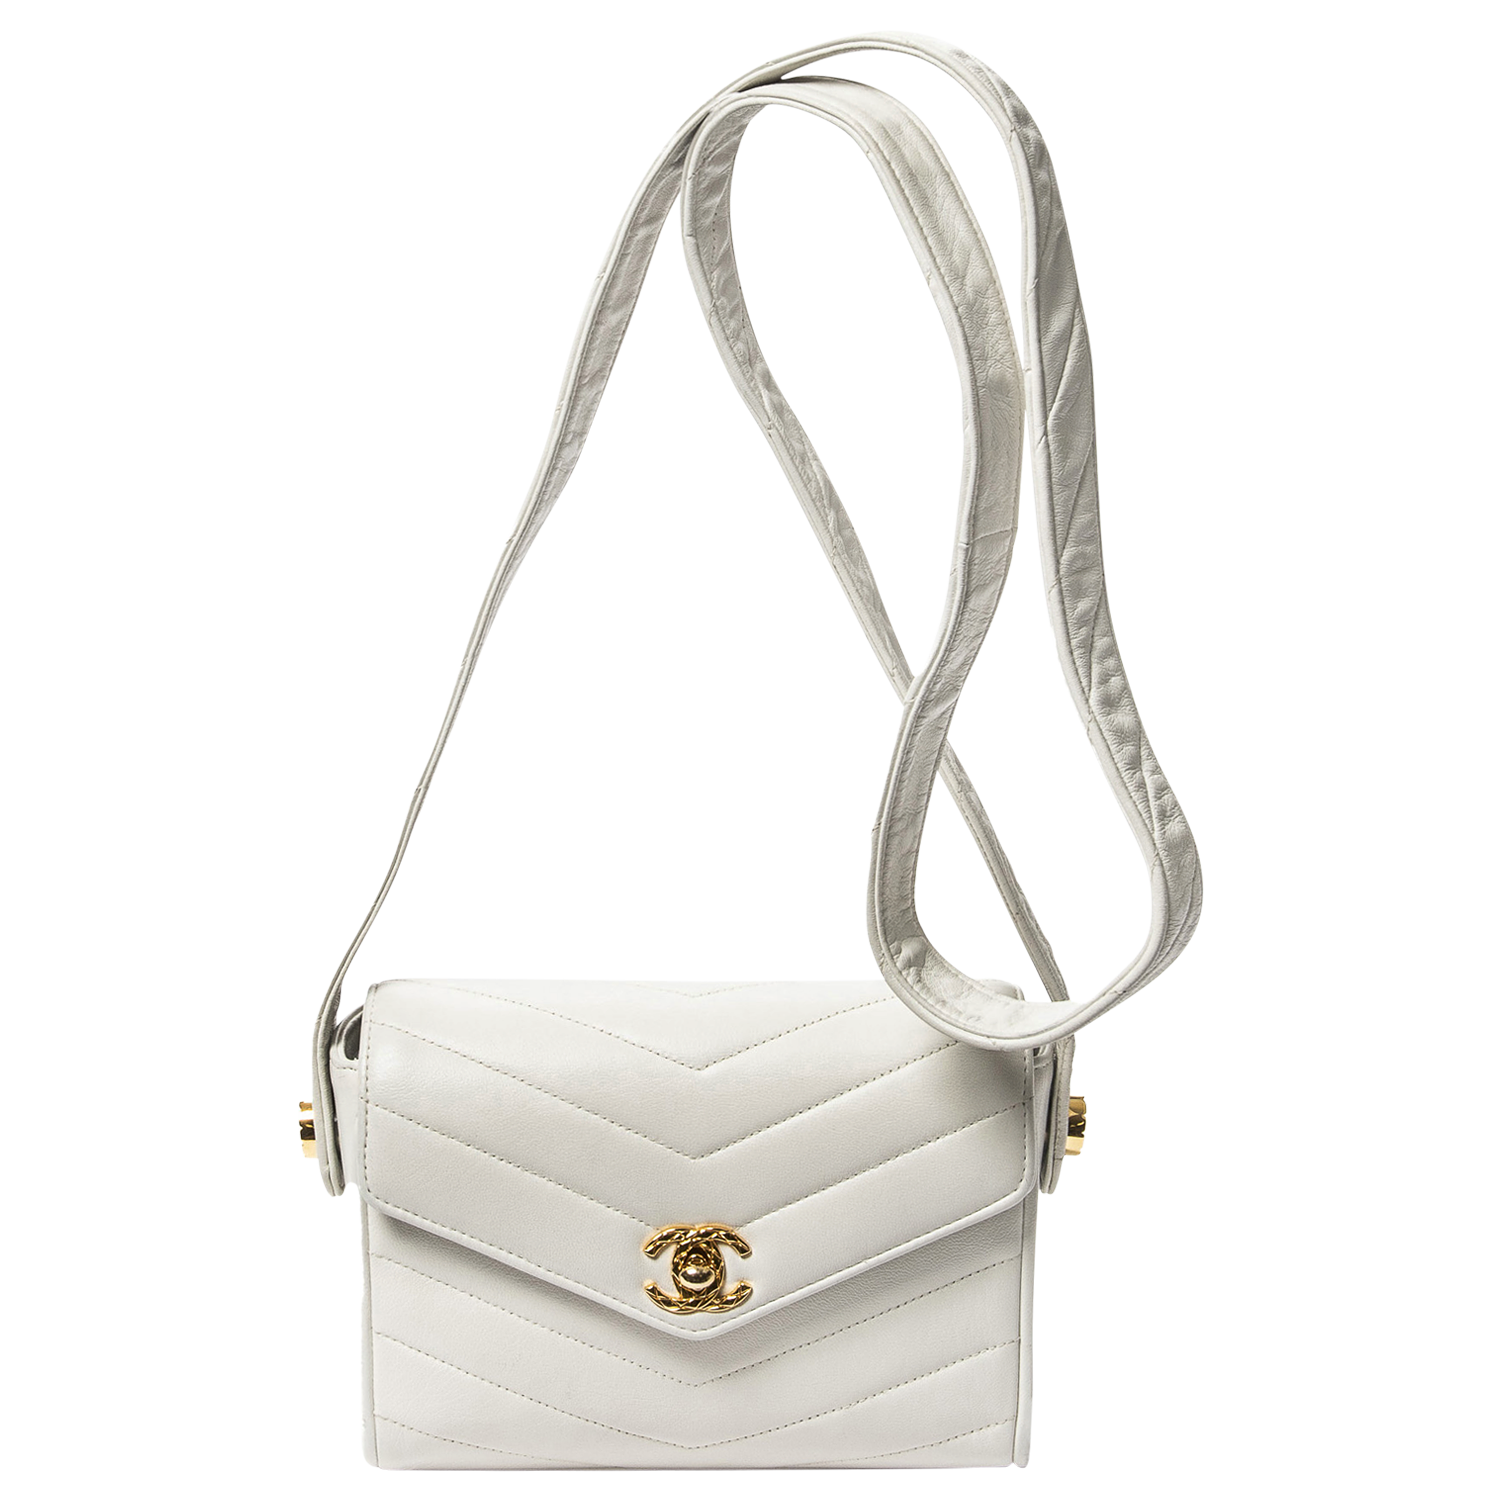 Chanel Rare 1991 Ivory Chevron Quilted Crossbody Bag